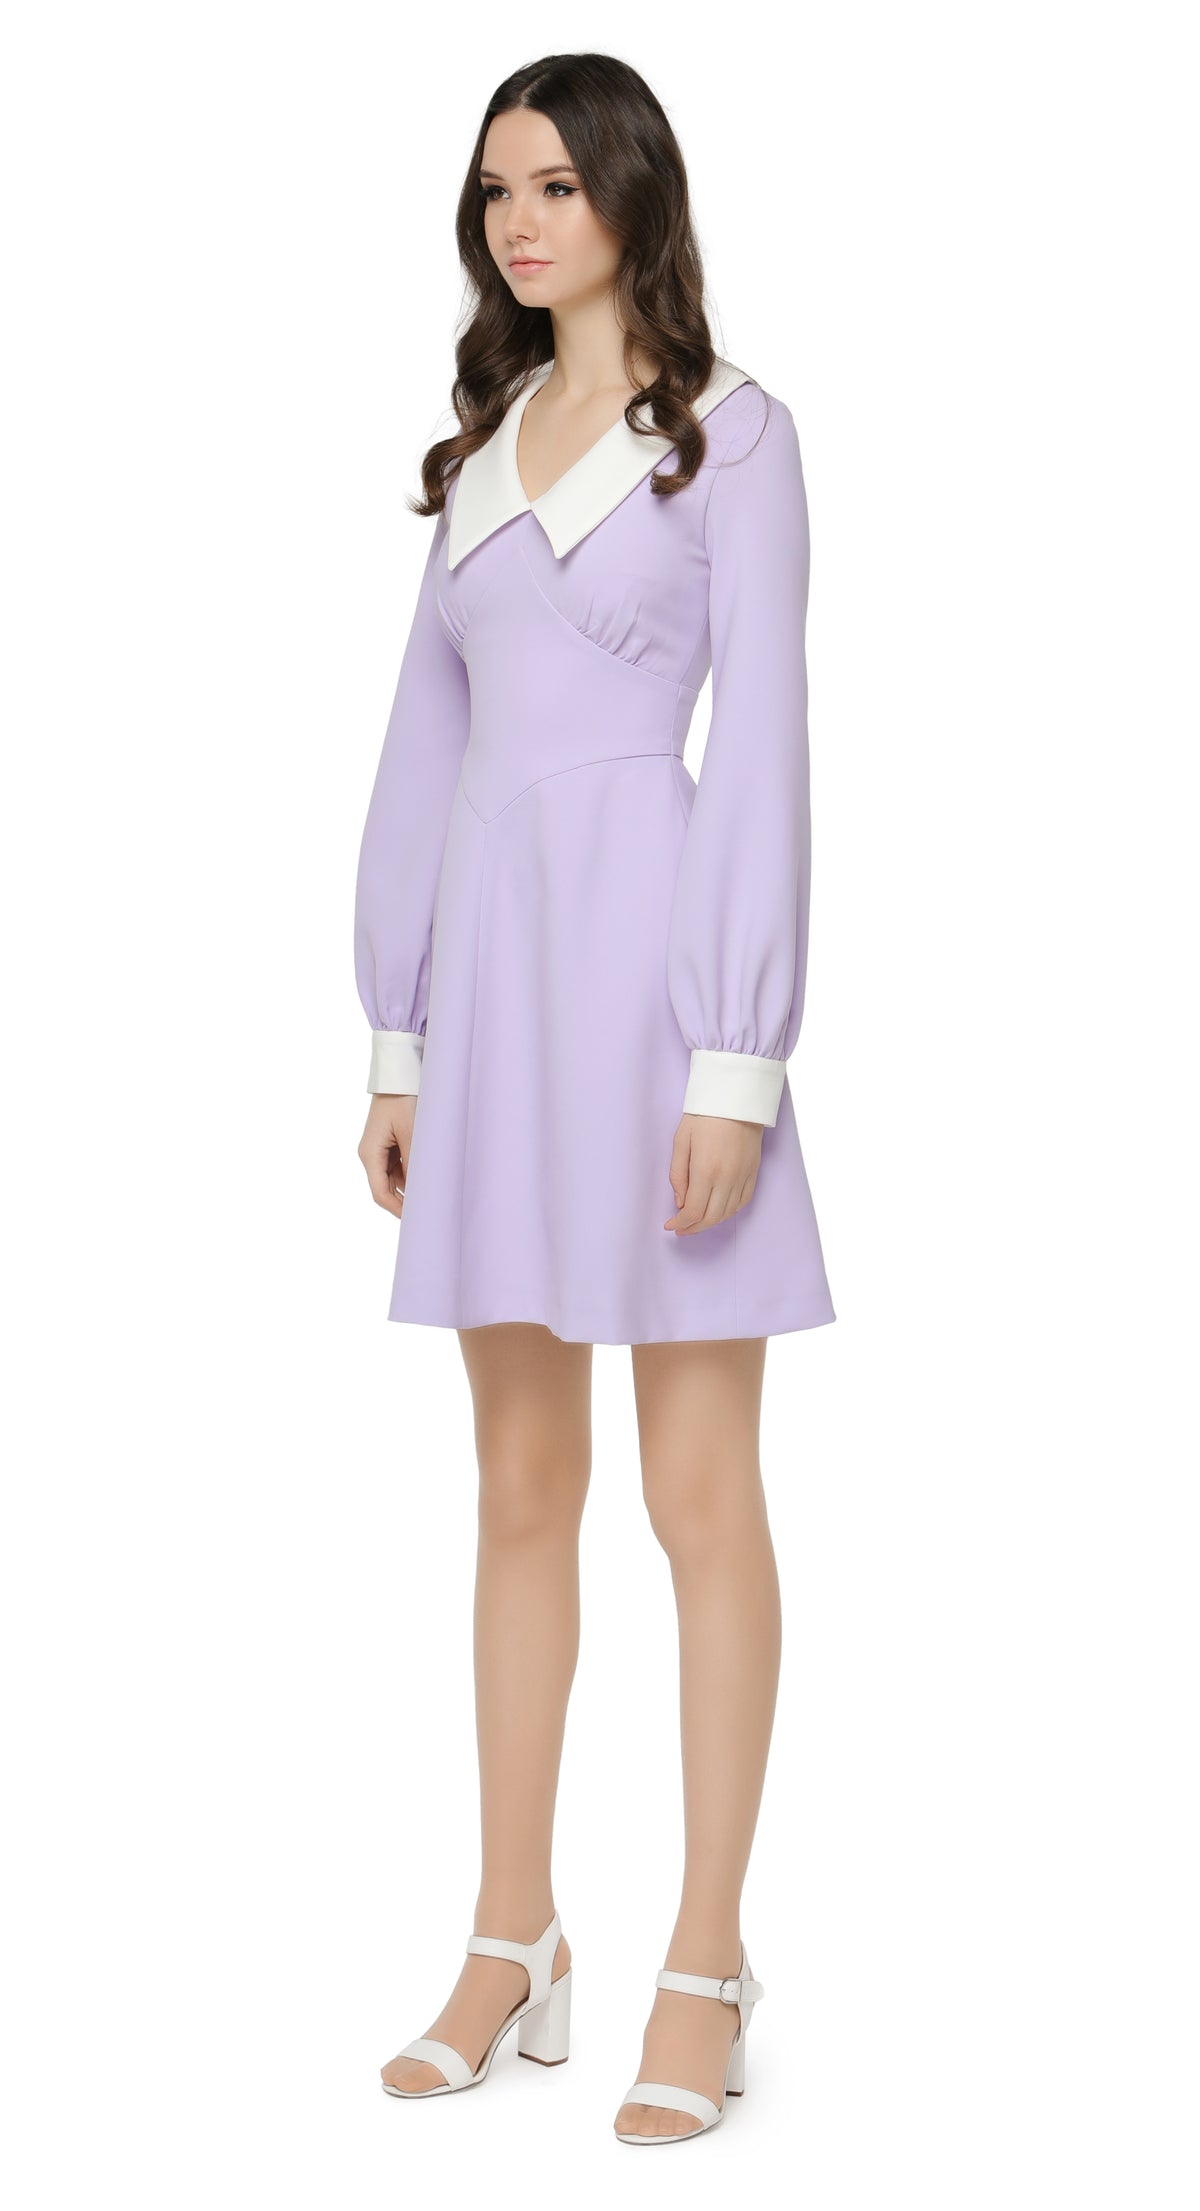 1970s style flared lavender party dress with large dramatic white collar and slightly puff sleeve at the cuff. A light big night out look dressed up with heels or down with kicks. Fully lined with invisible back zipper.